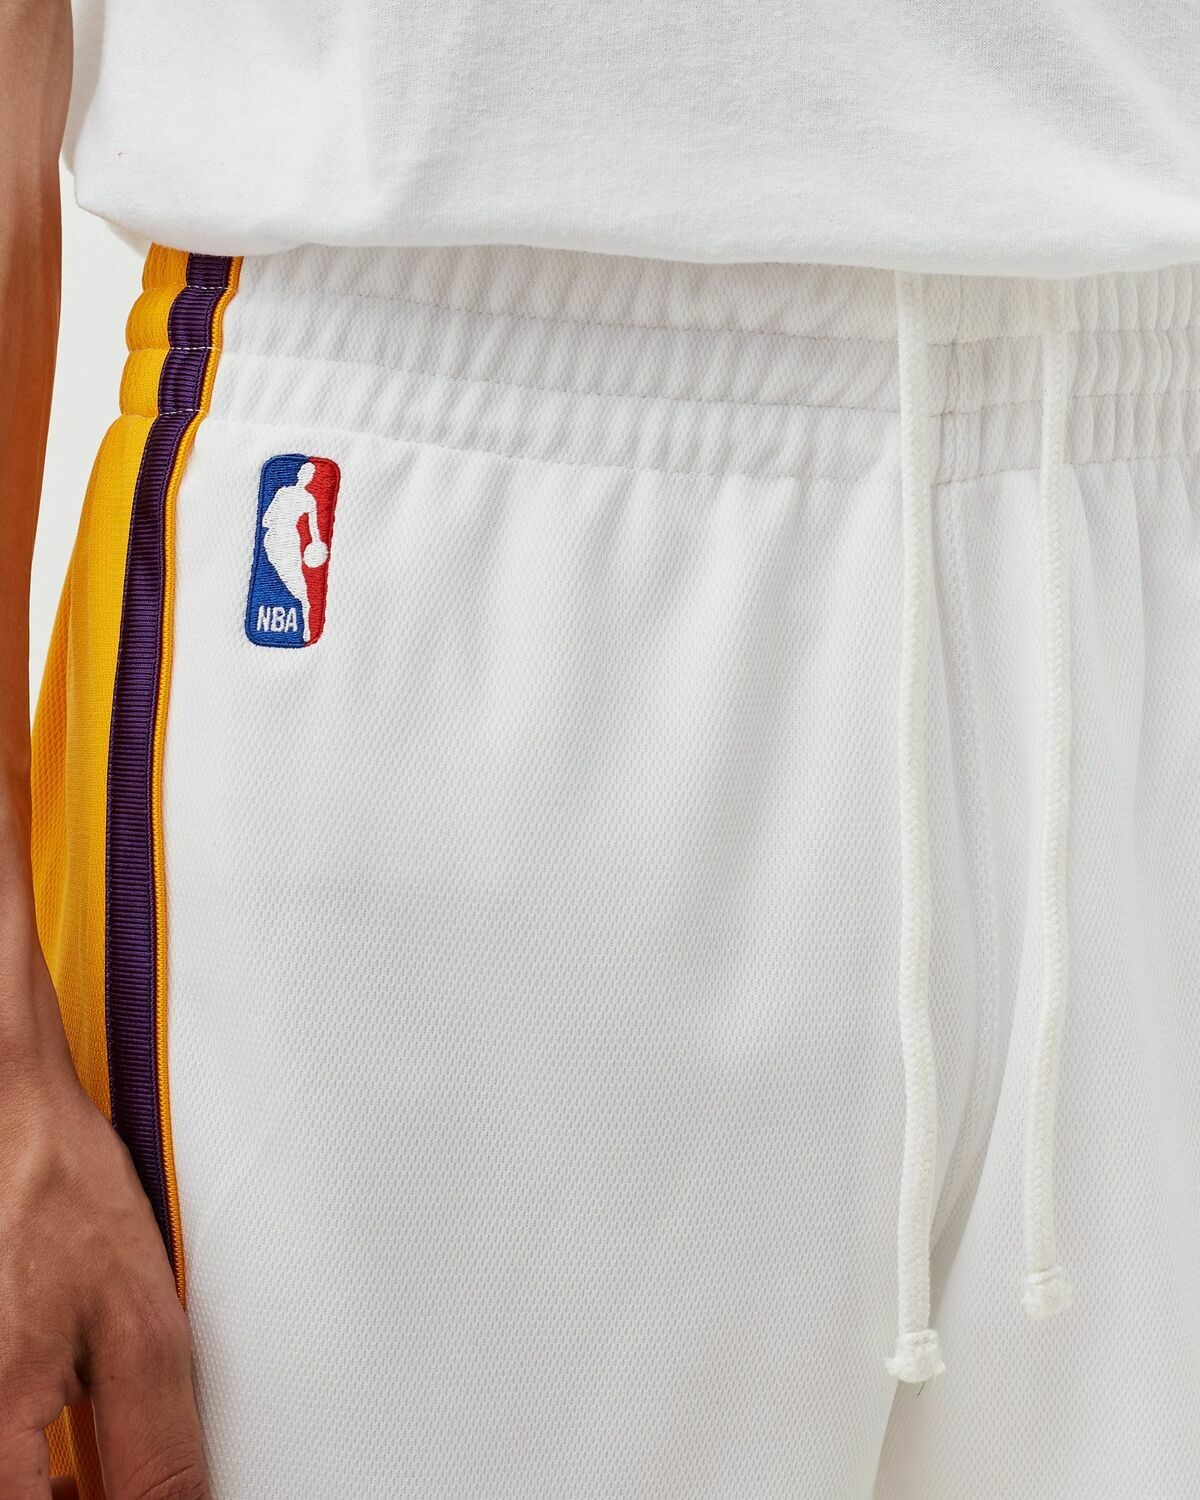 Mitchell & Ness Nba Authentic Shorts Los Angeles Lakers 2009 10 White - Mens - Sport & Team Shorts